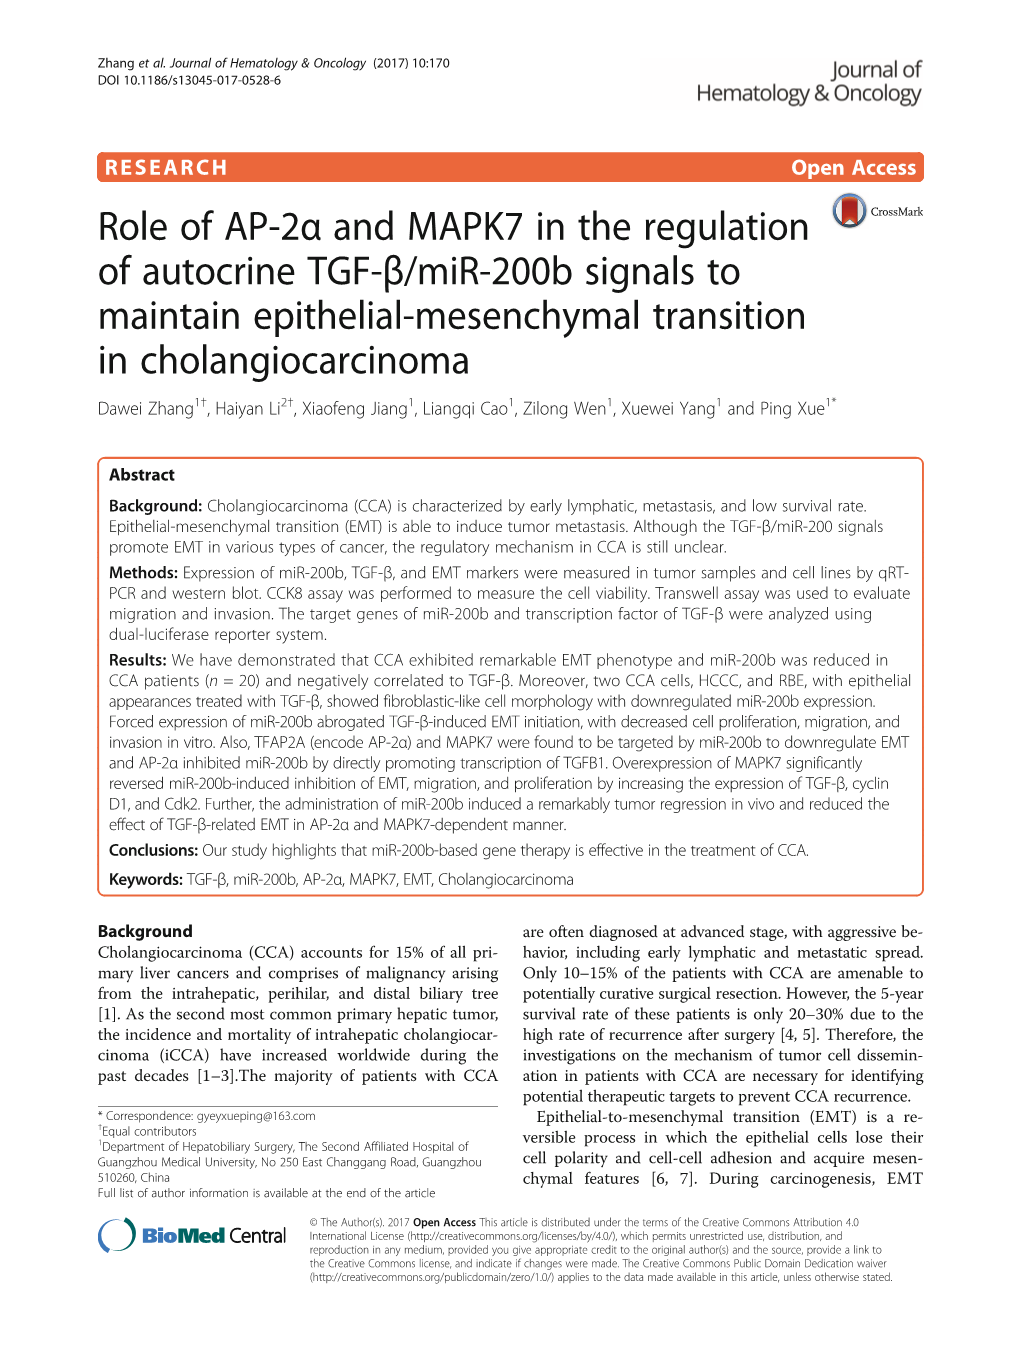 Role of AP-2Α and MAPK7 in the Regulation of Autocrine TGF-Β/Mir